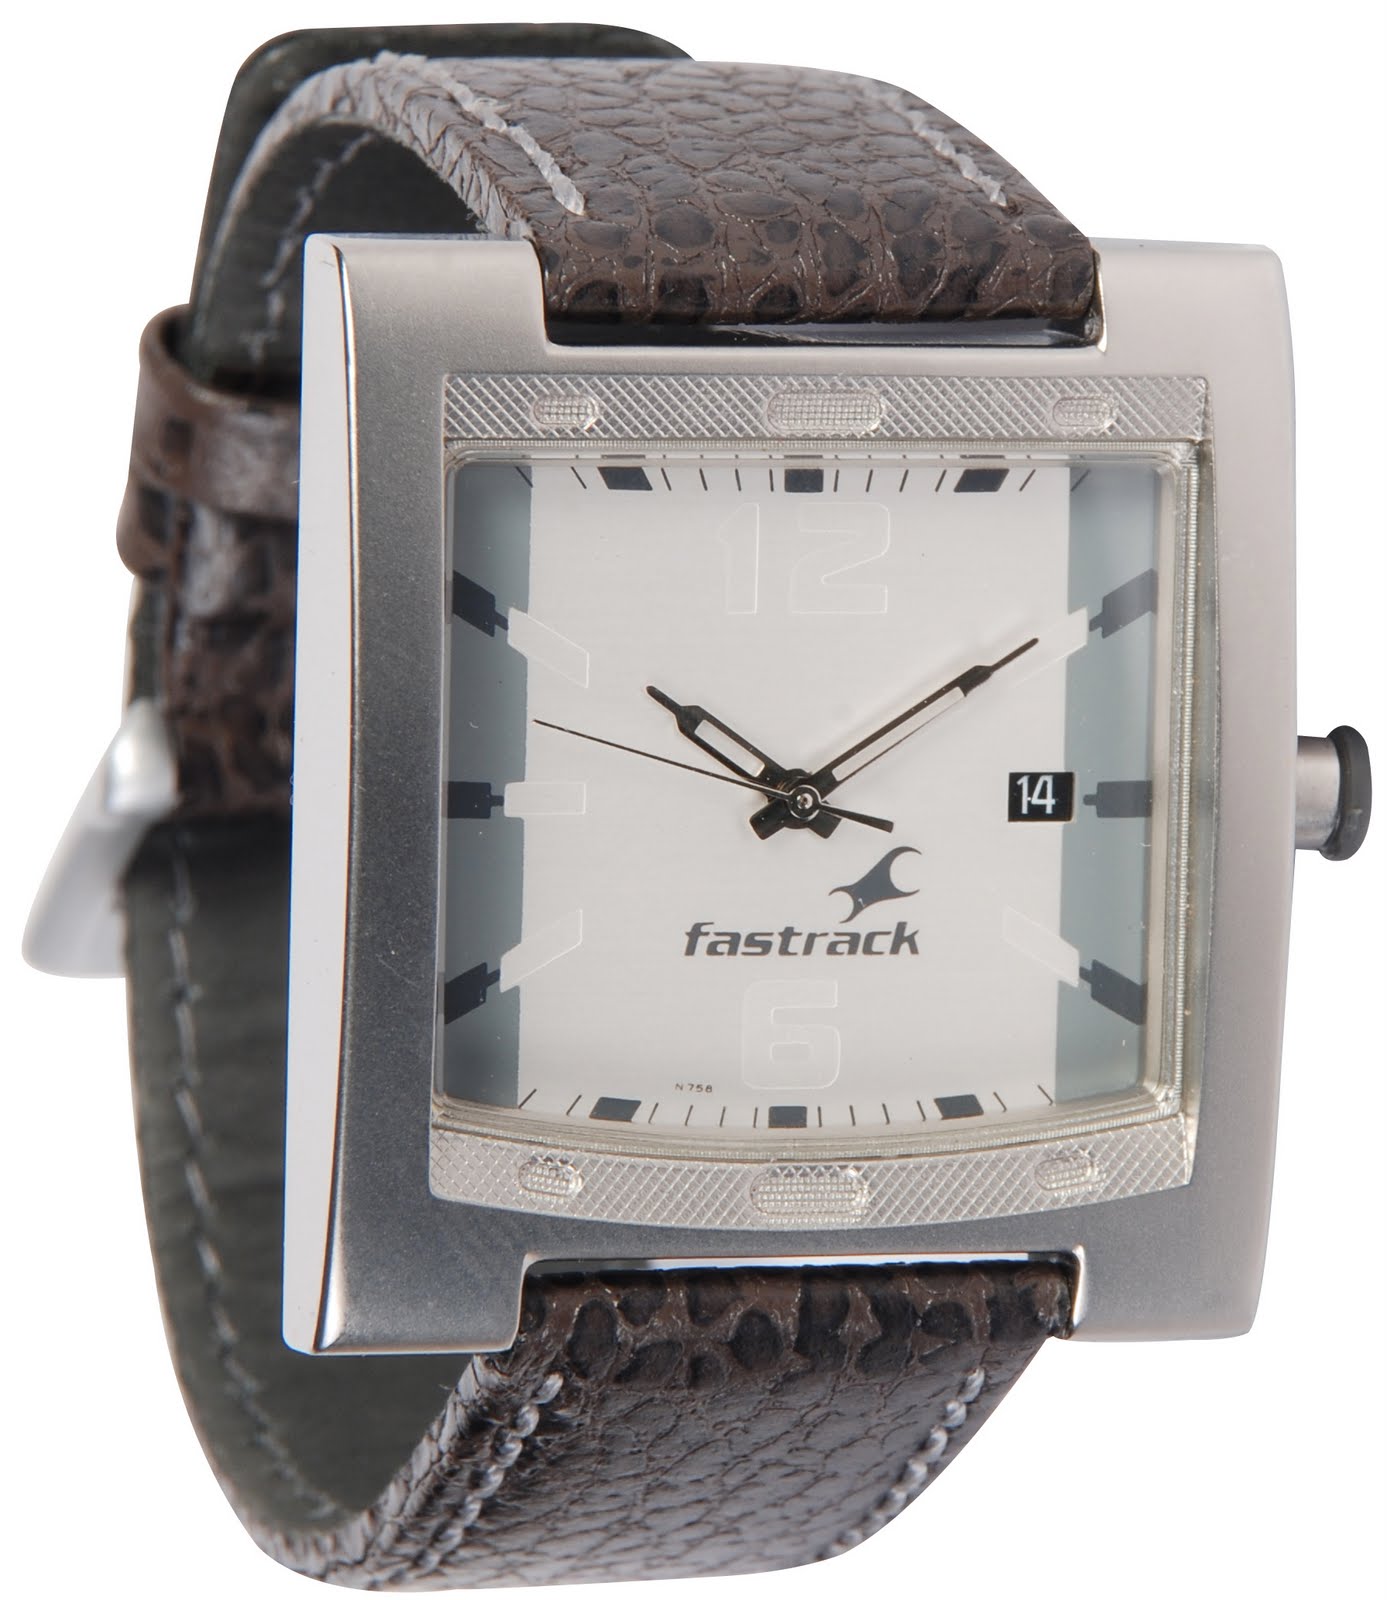 exposed fashion blog: fastrack watches 2011 feshion wallpaper